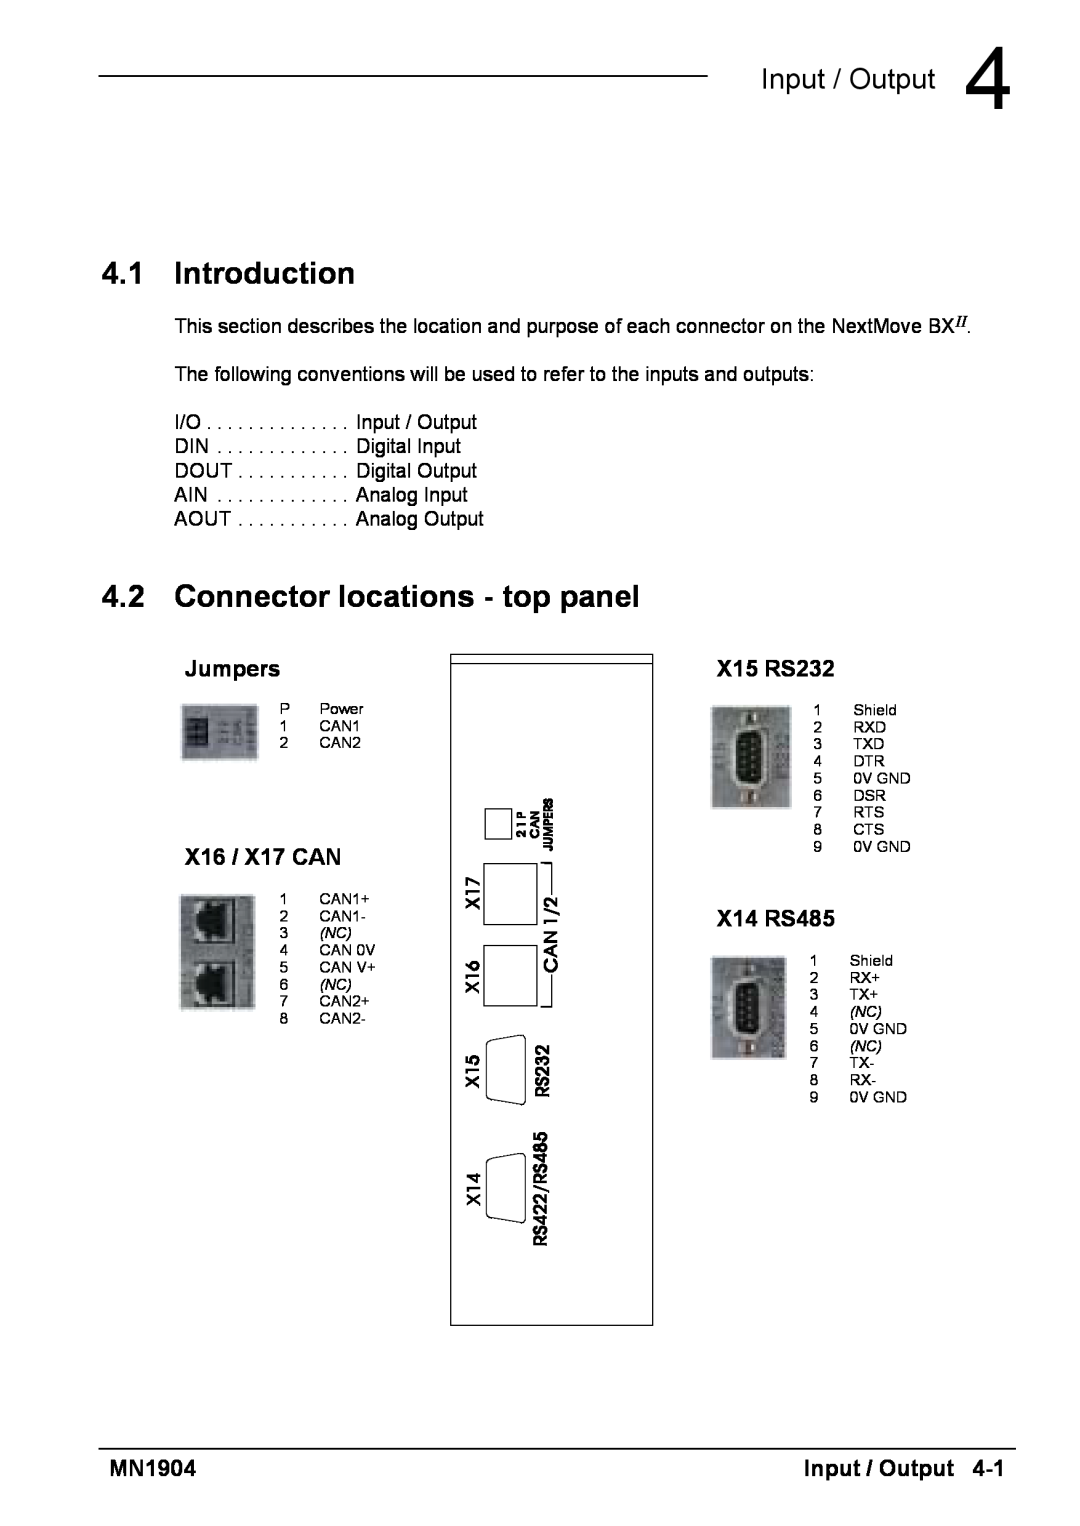 Baldor BXII installation manual Introduction, Connector locations - top panel, Input / Output 